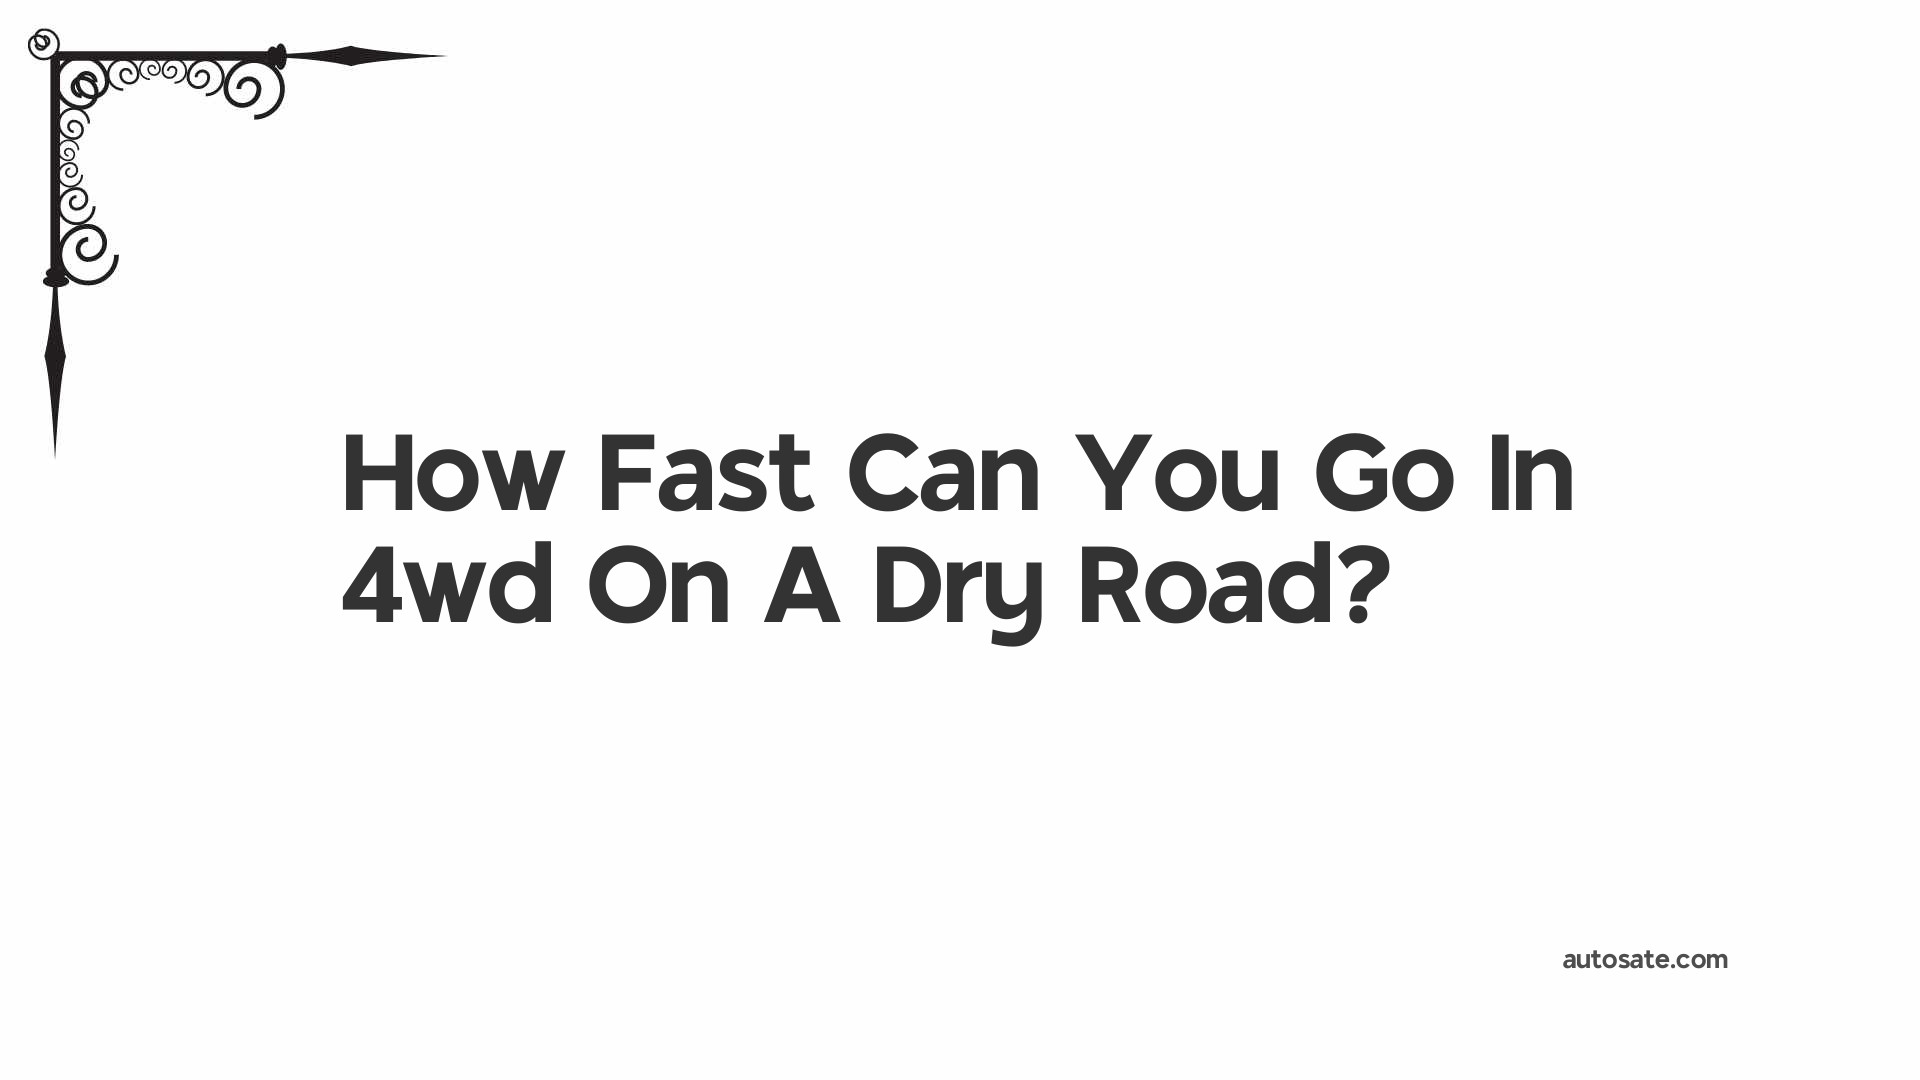 How Fast Can You Go In 4wd On A Dry Road?